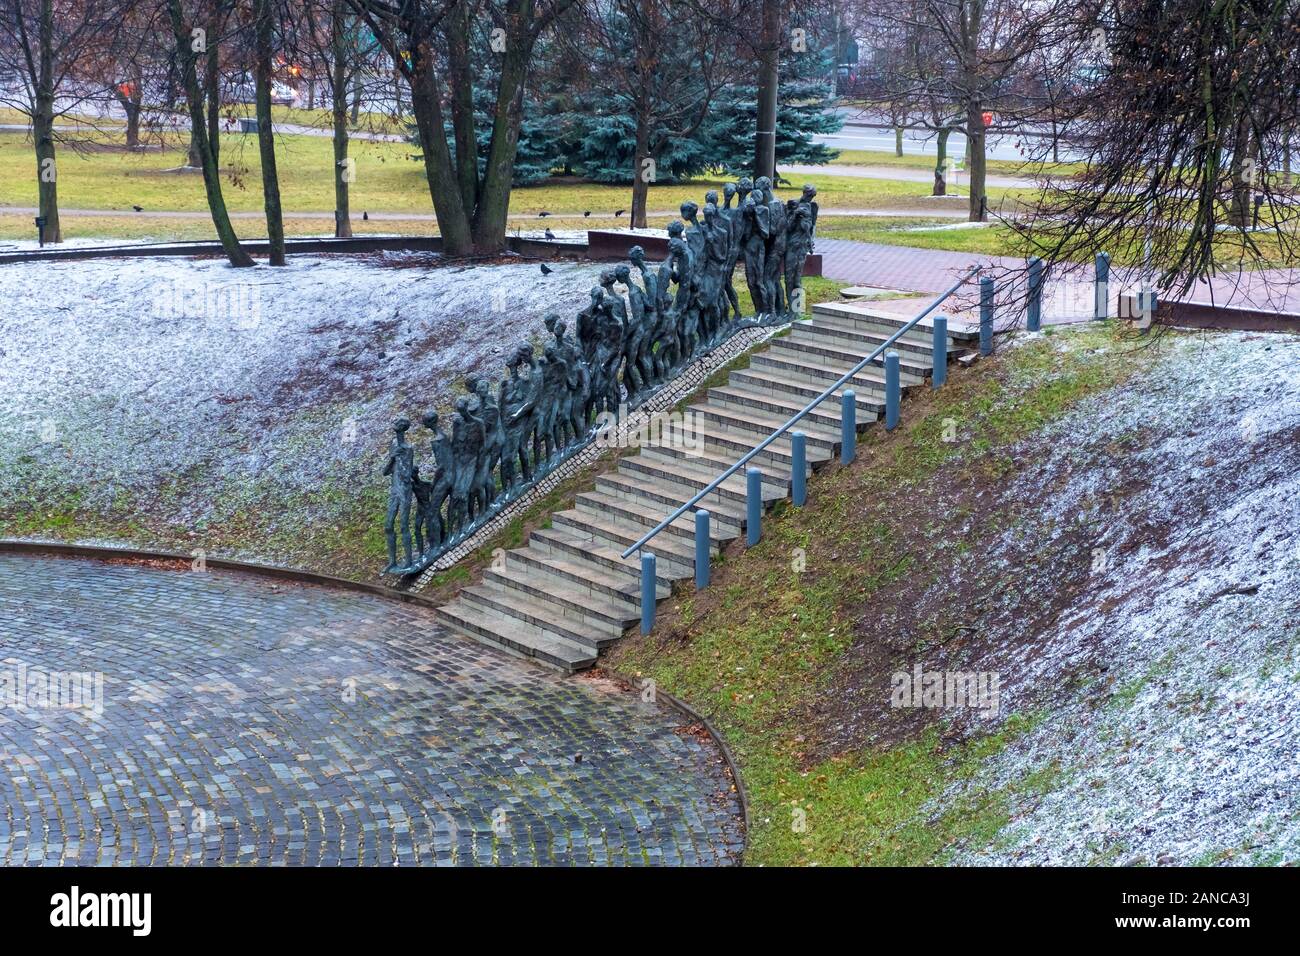 Minsk, Belarus - December, 14, 2019: Yama (the Pit) is Jewish Holocaust Memorial, massacre site of Jews killed by Nazis on that spot in 1942, Minsk Stock Photo